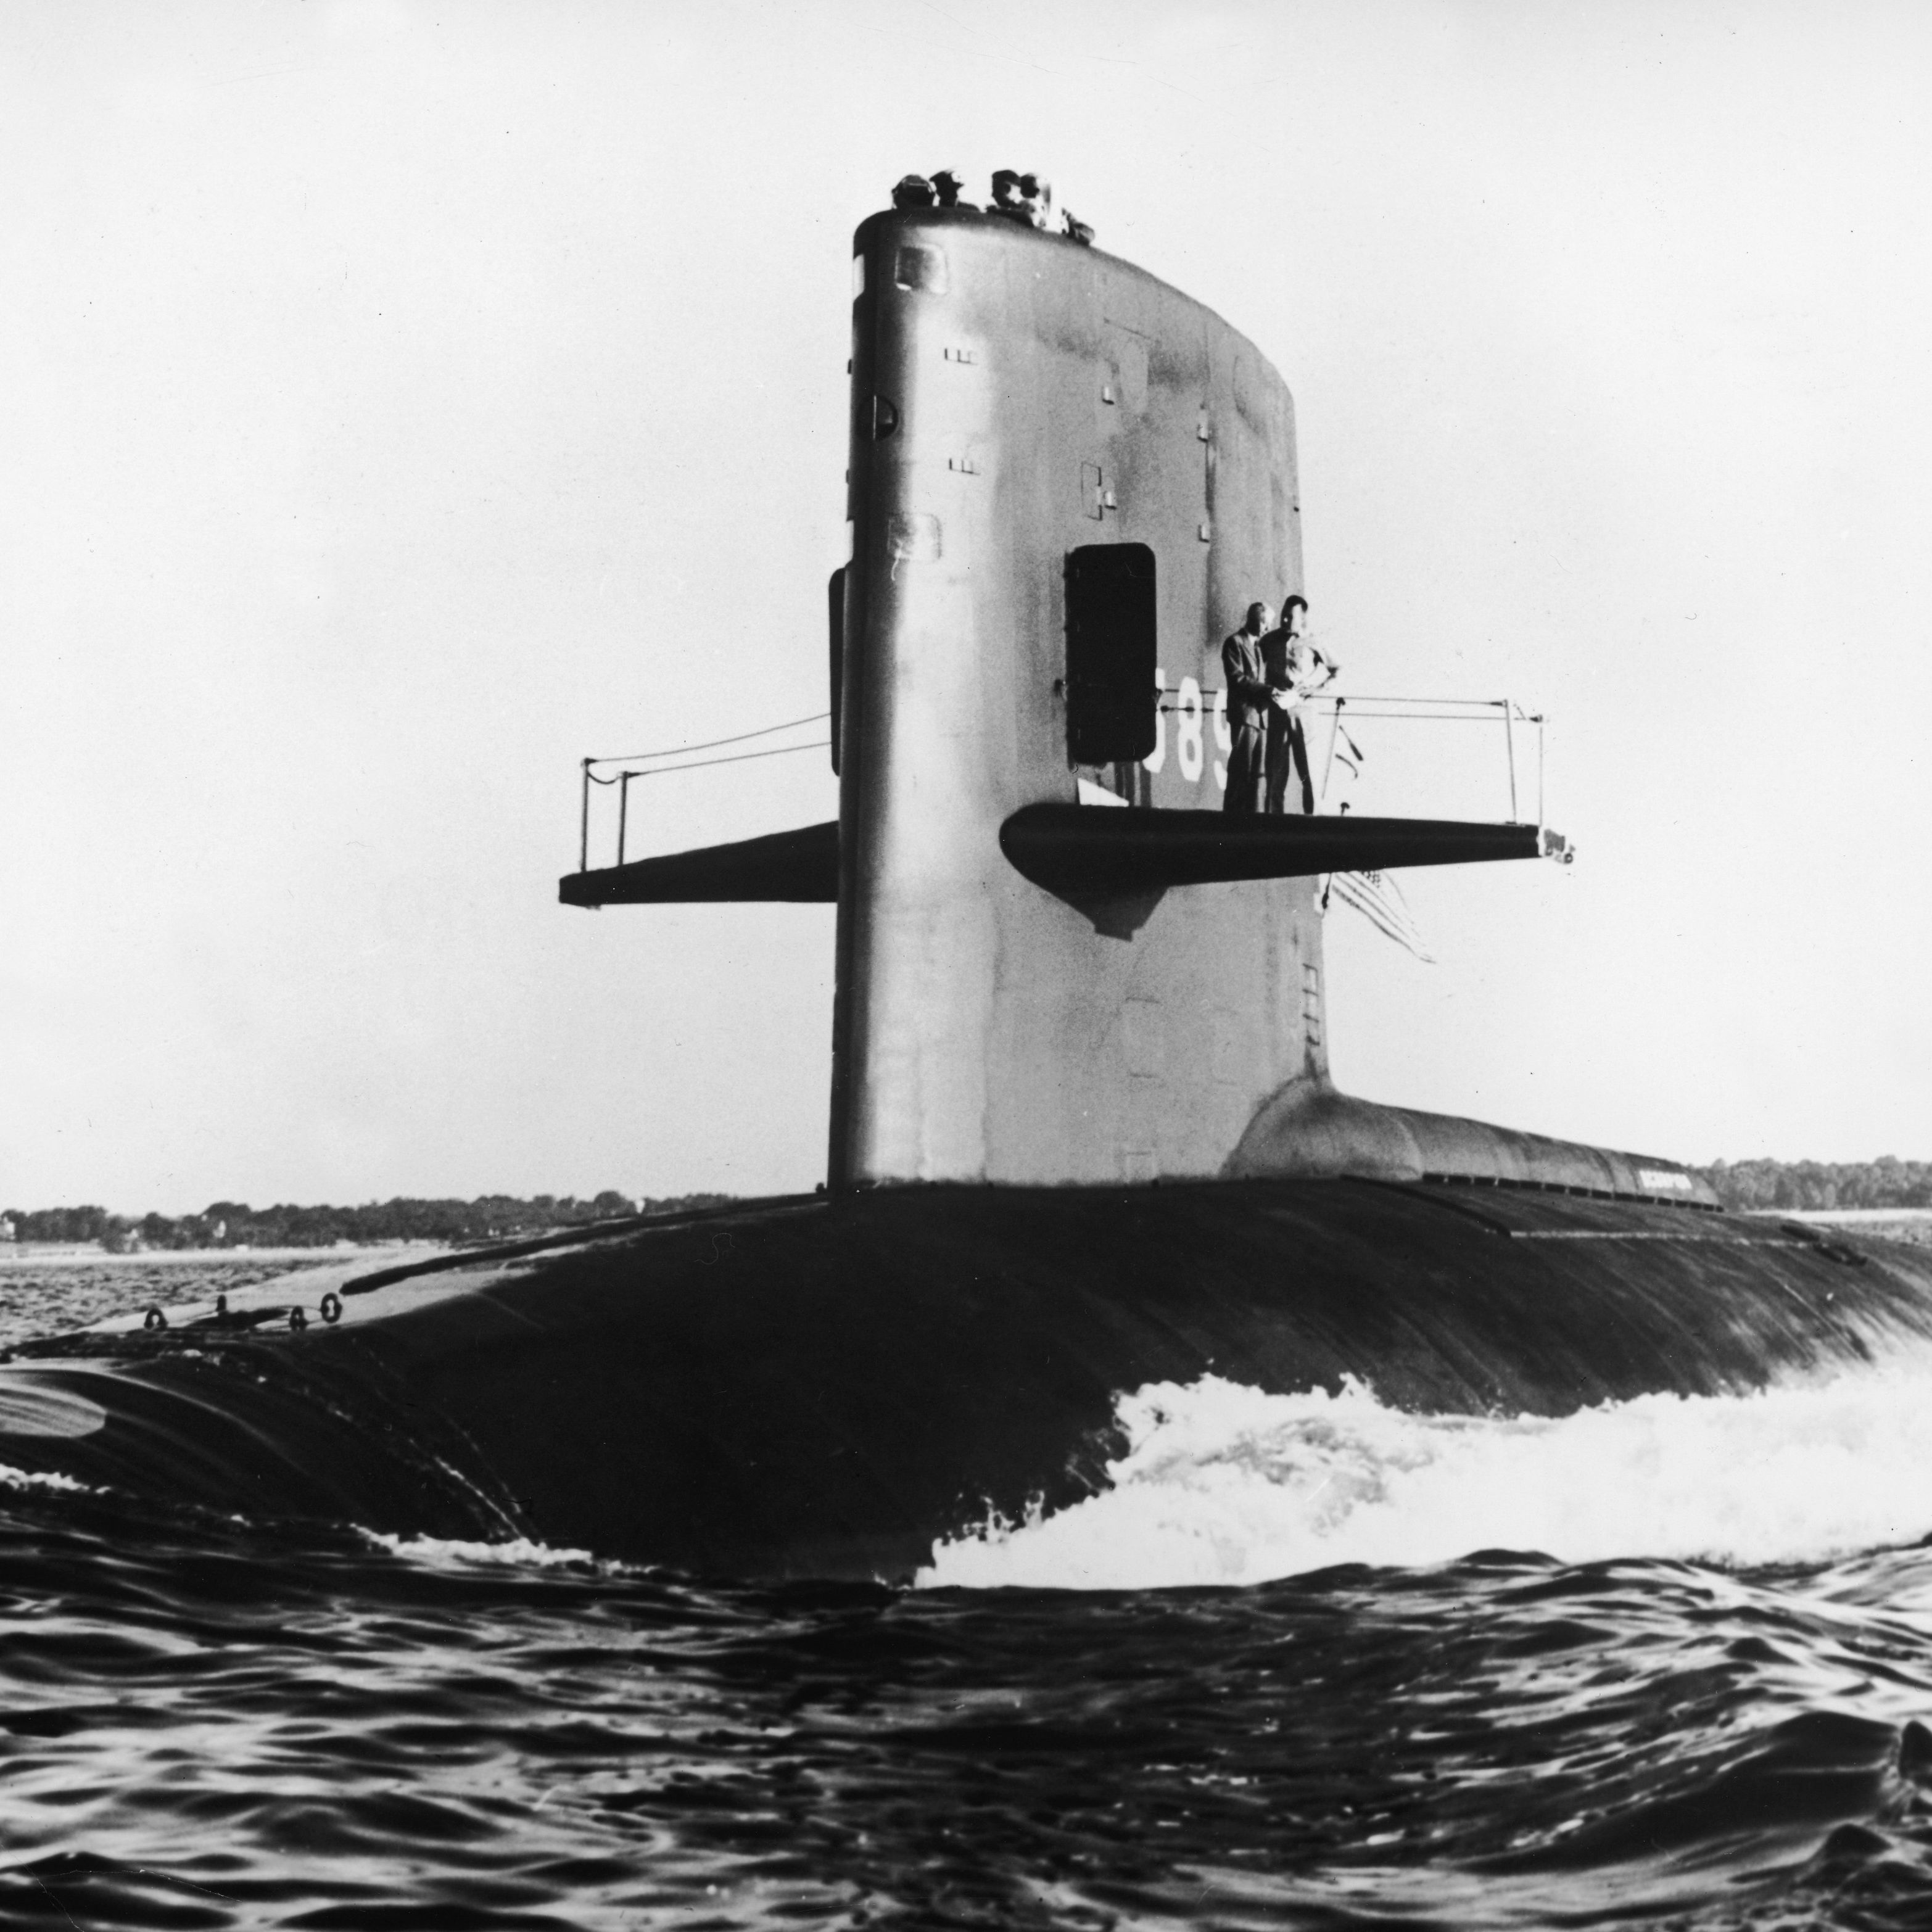 USS Scorpion Was the Last American Sub Lost at Sea, And It's Still Shrouded in Mystery